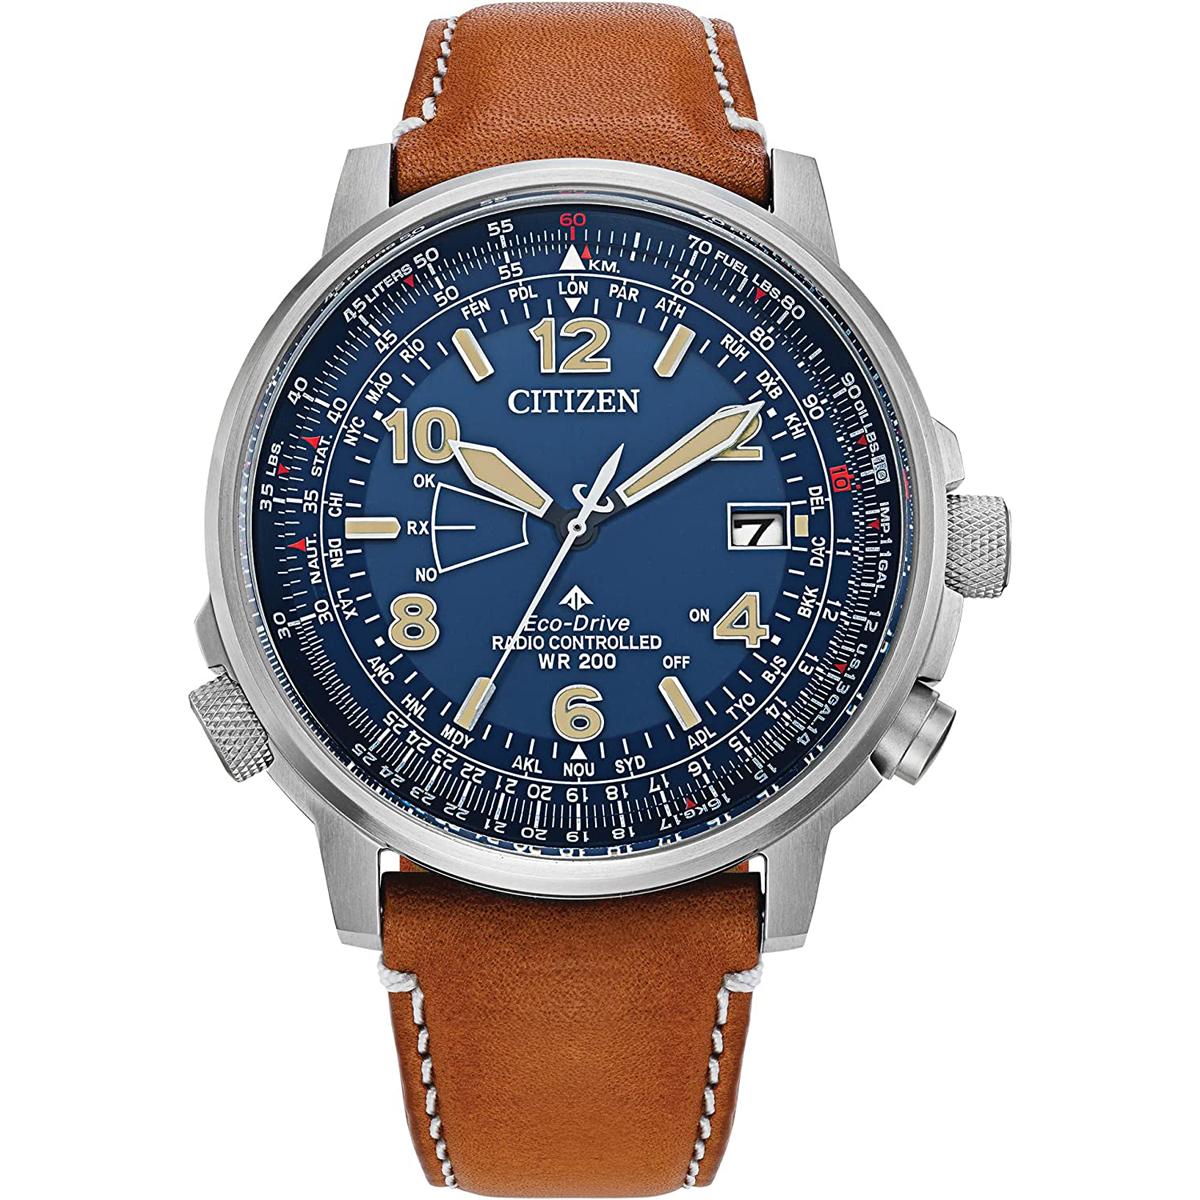 Citizen Eco-Drive Promaster Air Skyhawk Atomic Time Keeping Watch for $274.99 Shipped